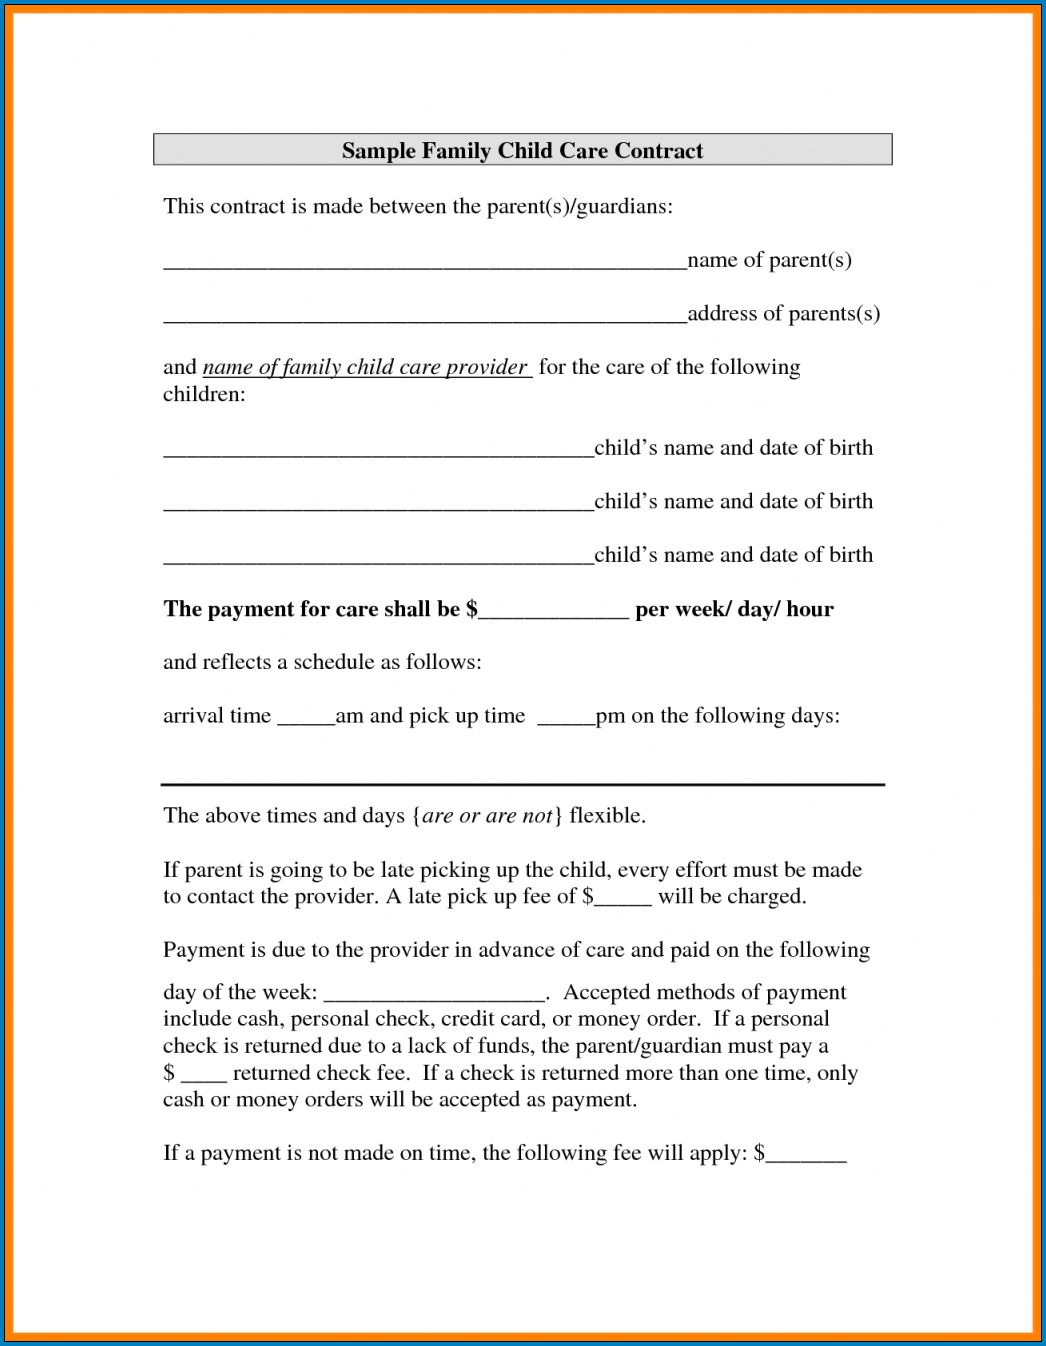 Sample of Child Care Agreement Between Parents Template